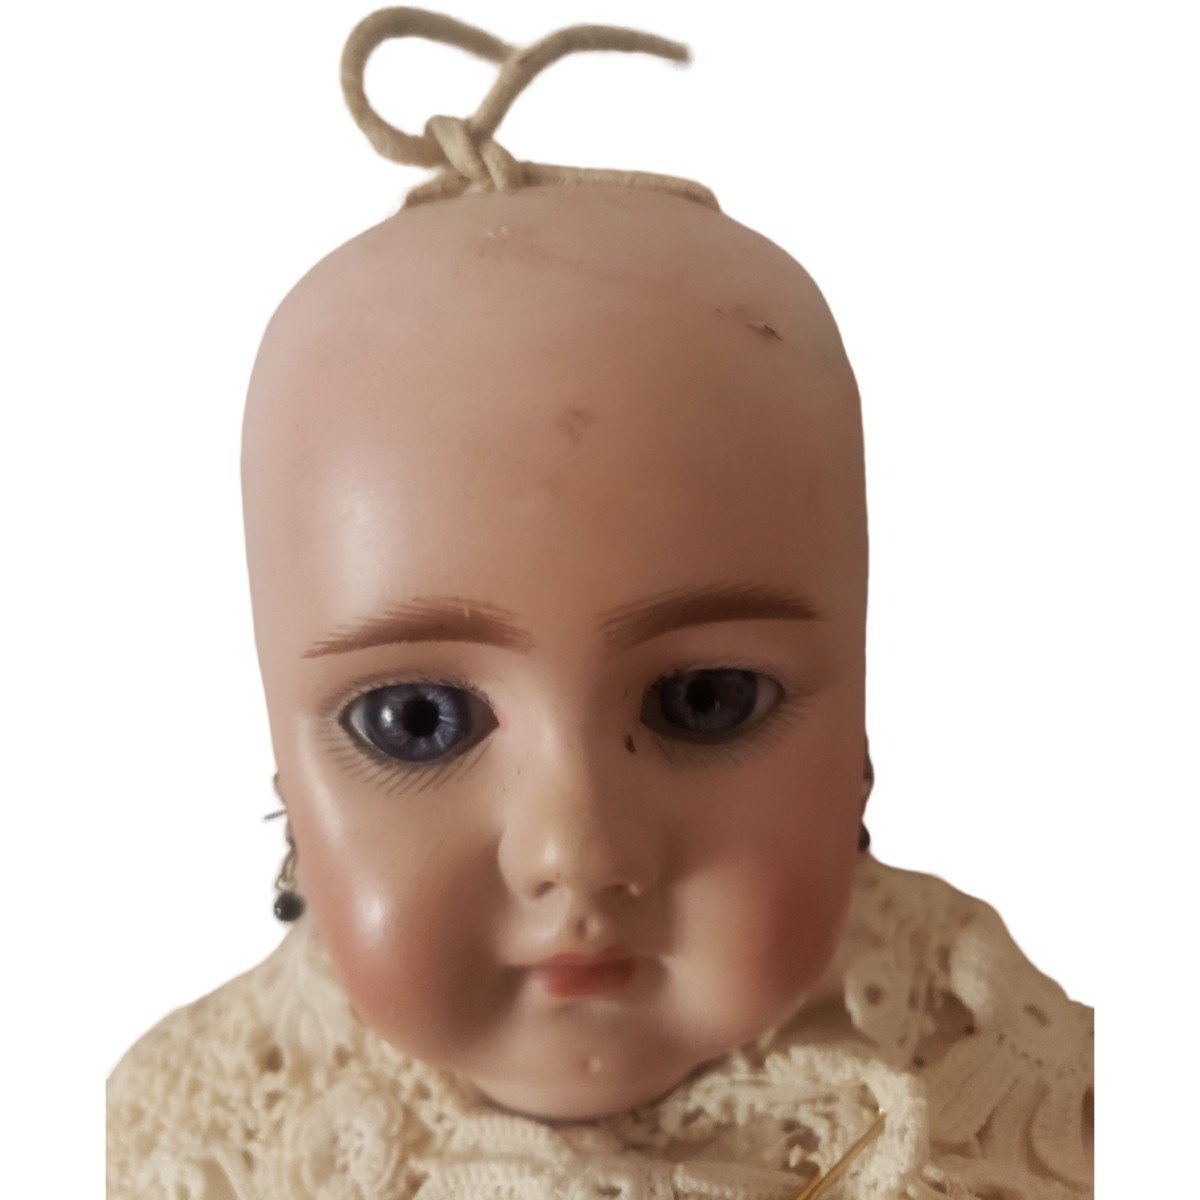 Bahr Proschild Closed Mouth Doll Marquee 204 And 6 In